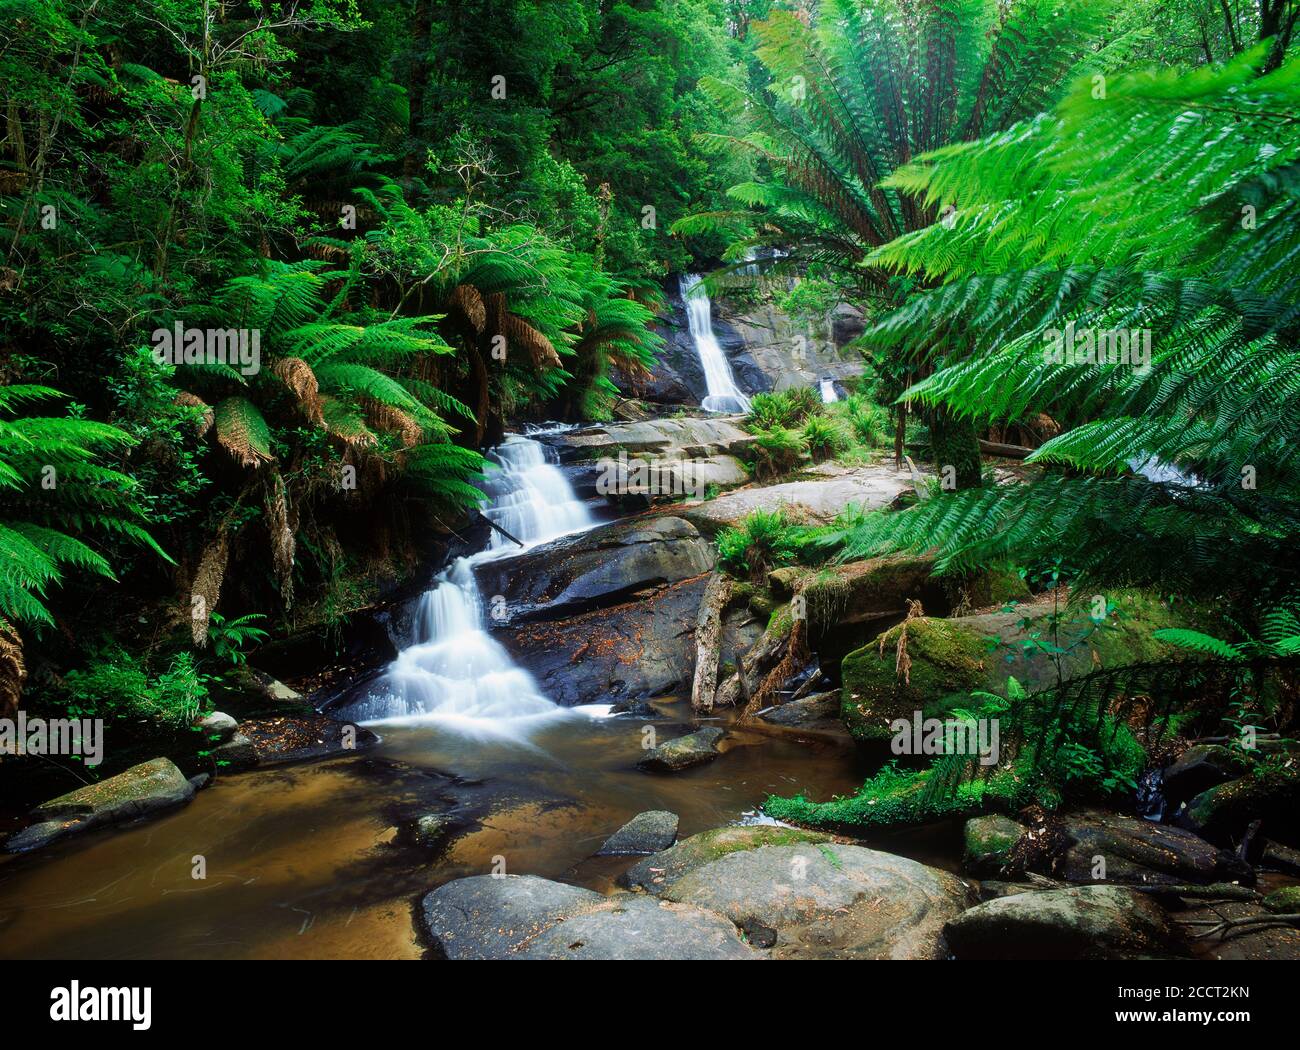 Wild free flowing stream falling over rocks weaving though the rain forests of the world.  Generic Stock Photo